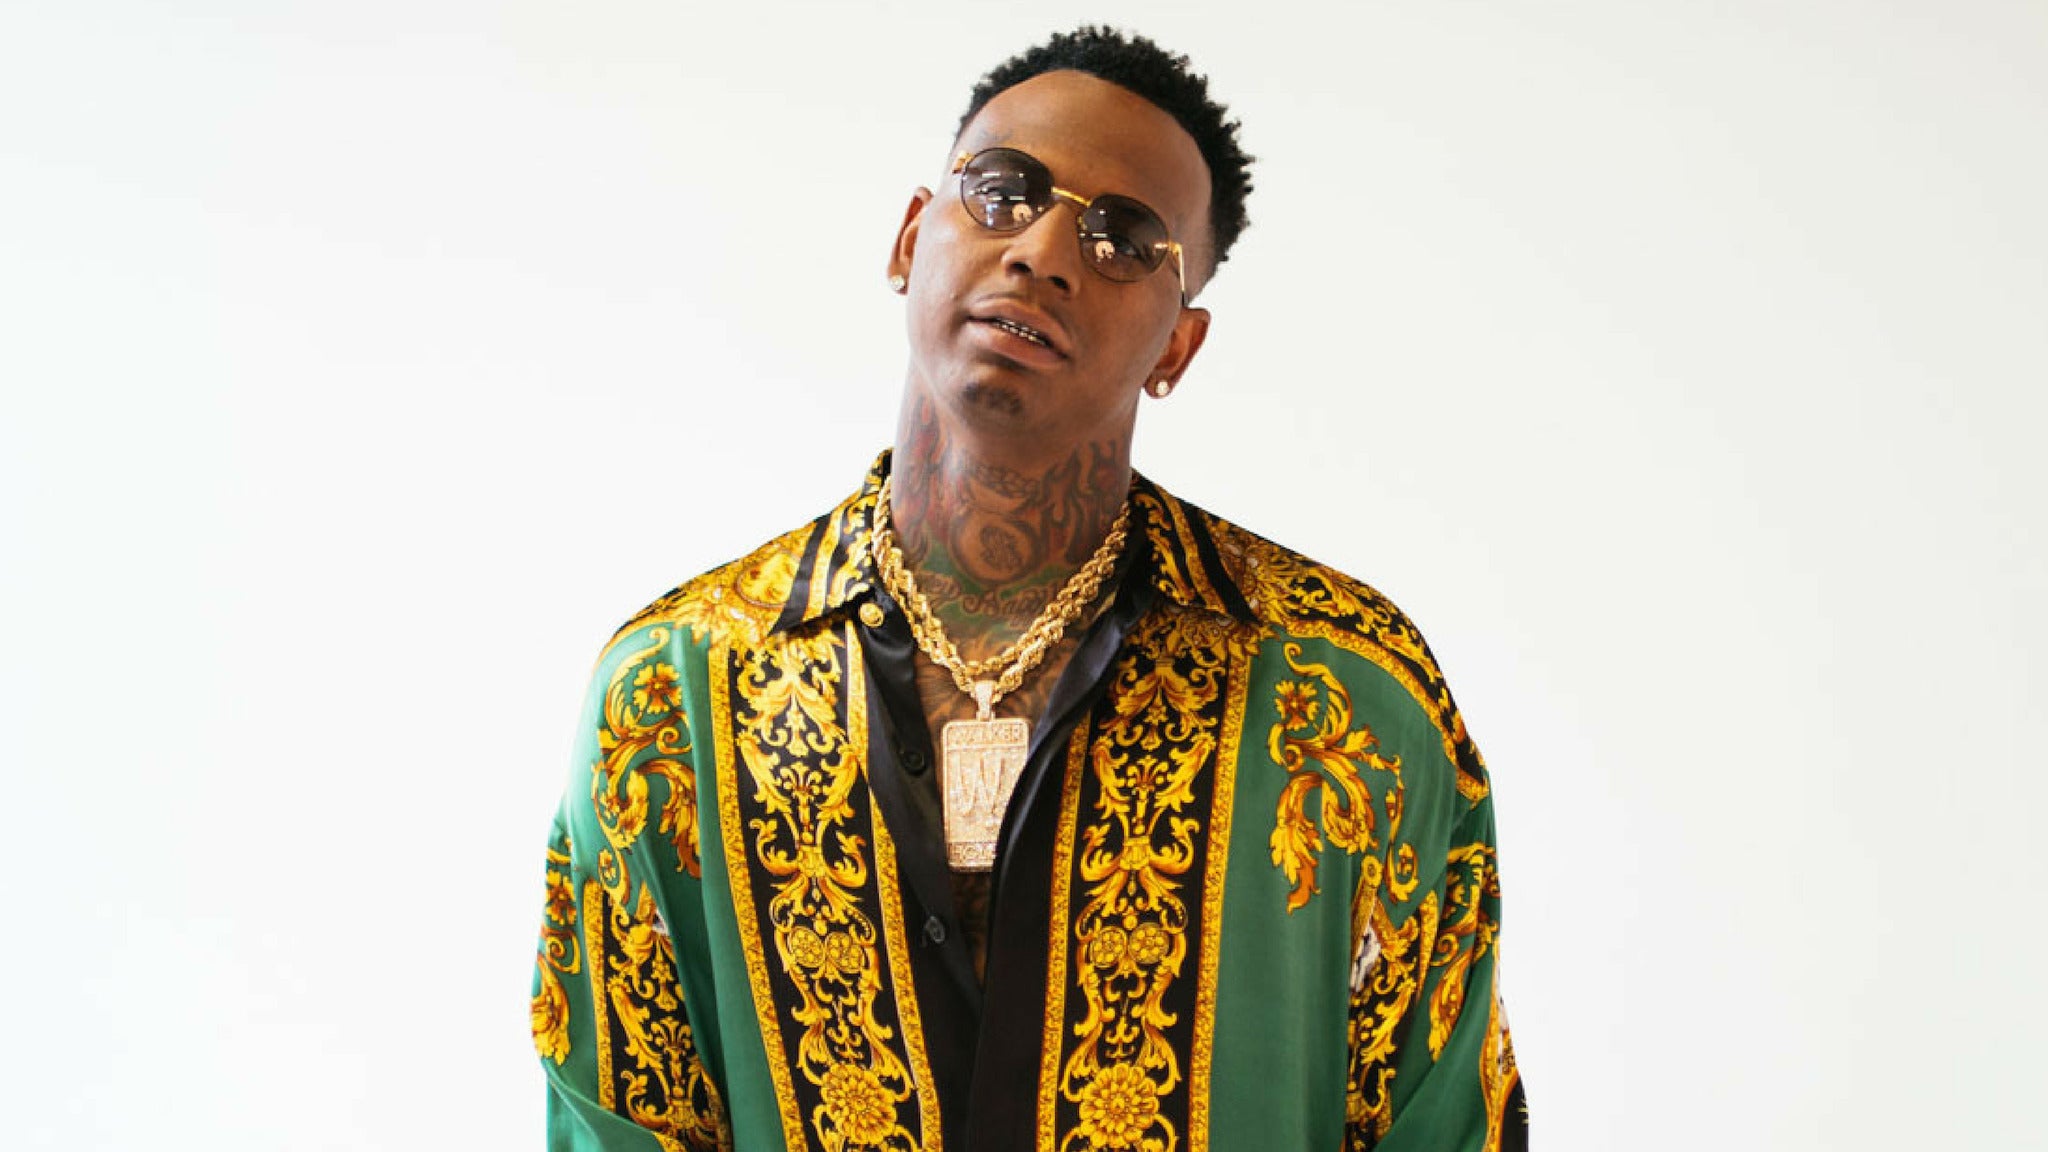 Moneybagg Yo in Detroit promo photo for Live Nation presale offer code